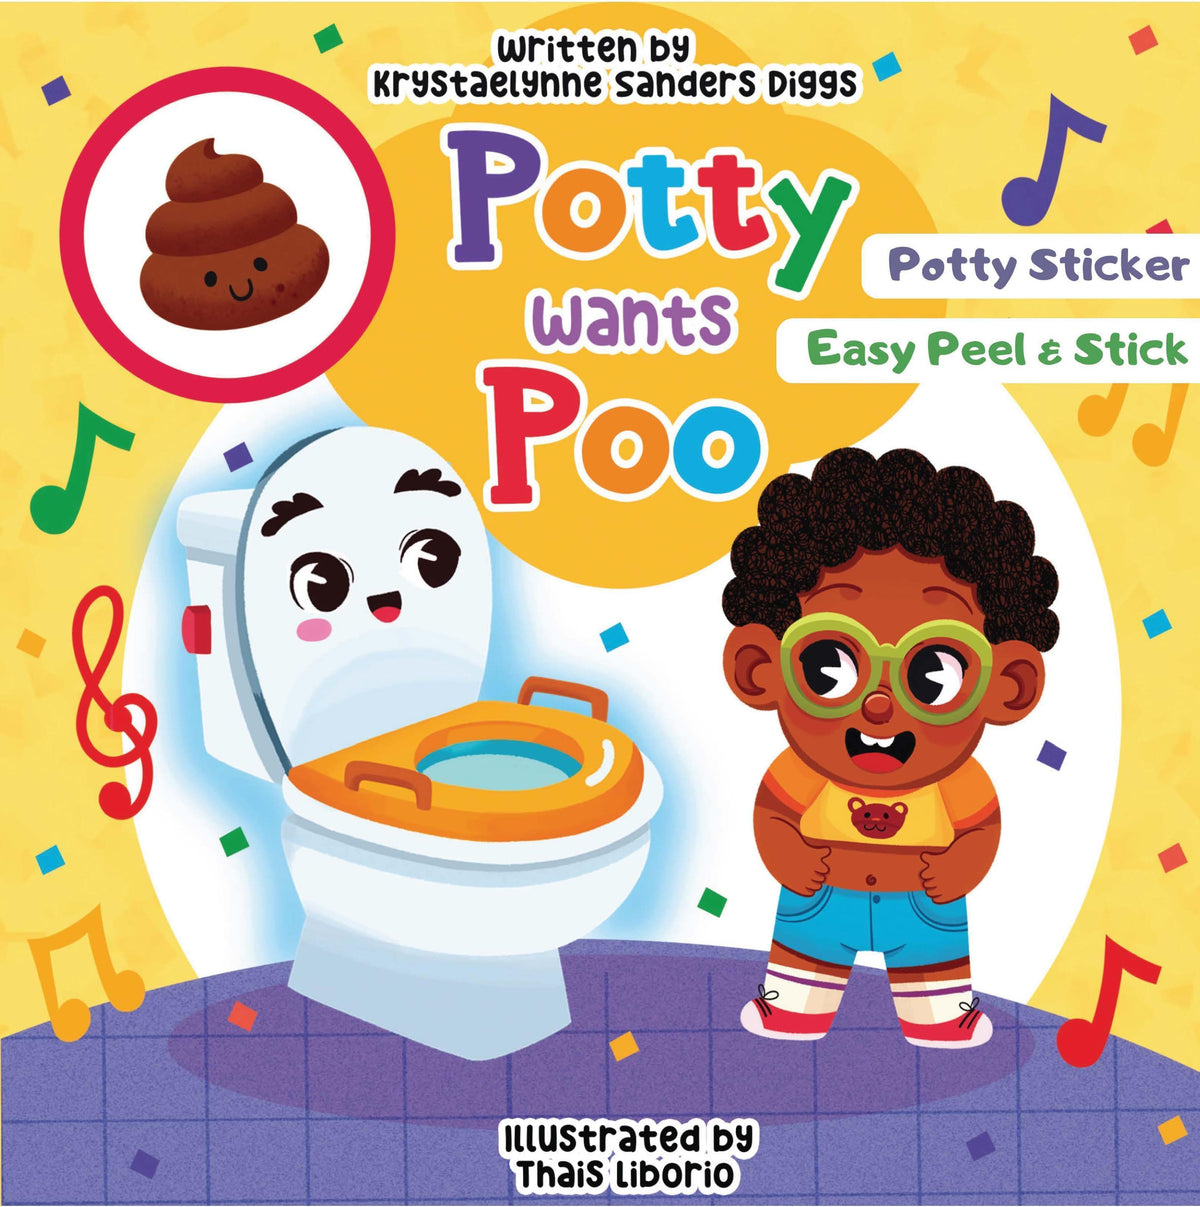 Potty Wants Poo - Author Krystaelynne Sanders Diggs [Body Safety]